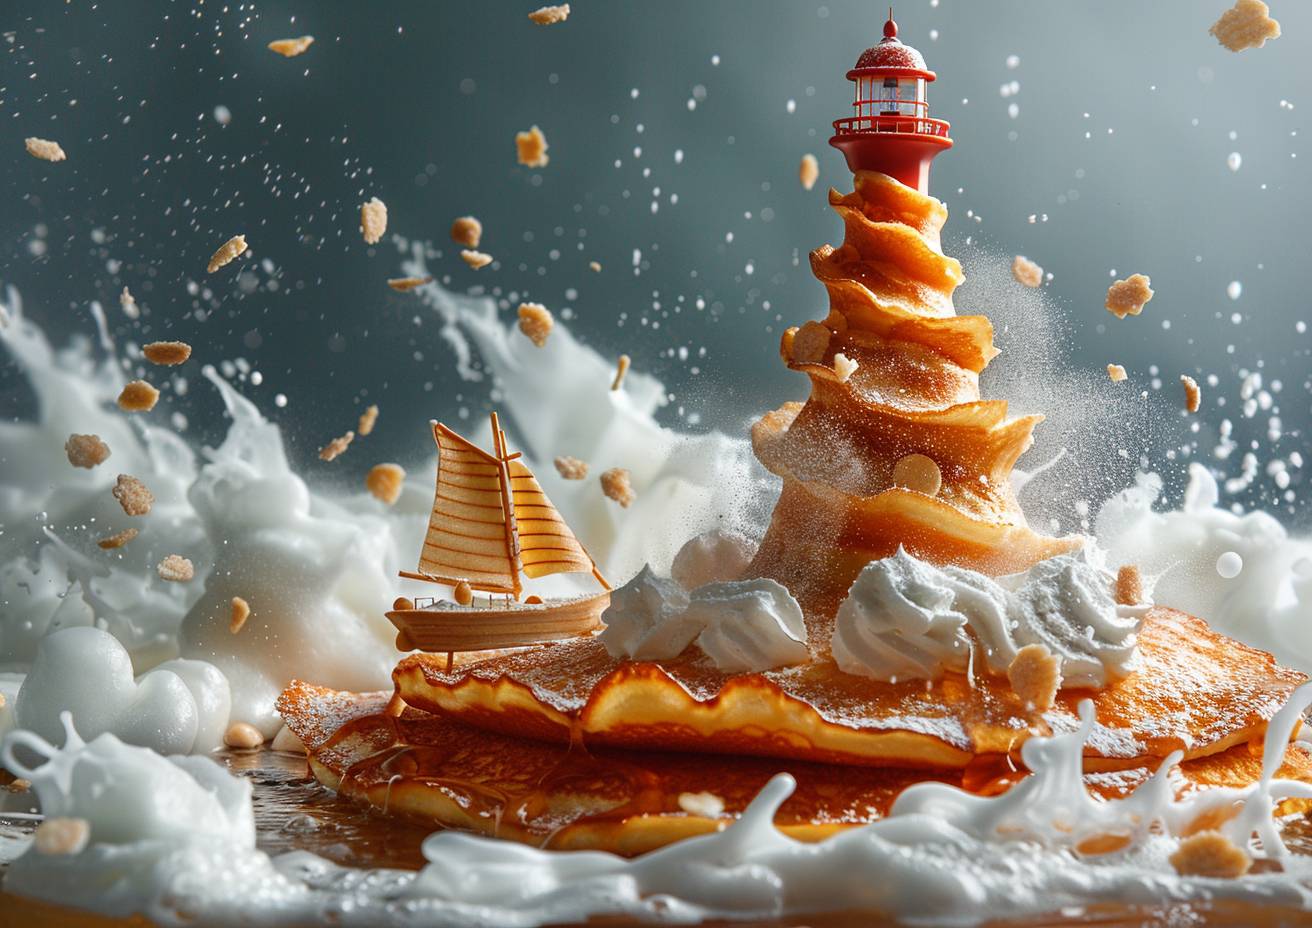 In the style of surreal food photography, a lighthouse formed from pancakes, an eponymous sailing boat on an ocean of syrup, sugar powder, with a strong visual flow.